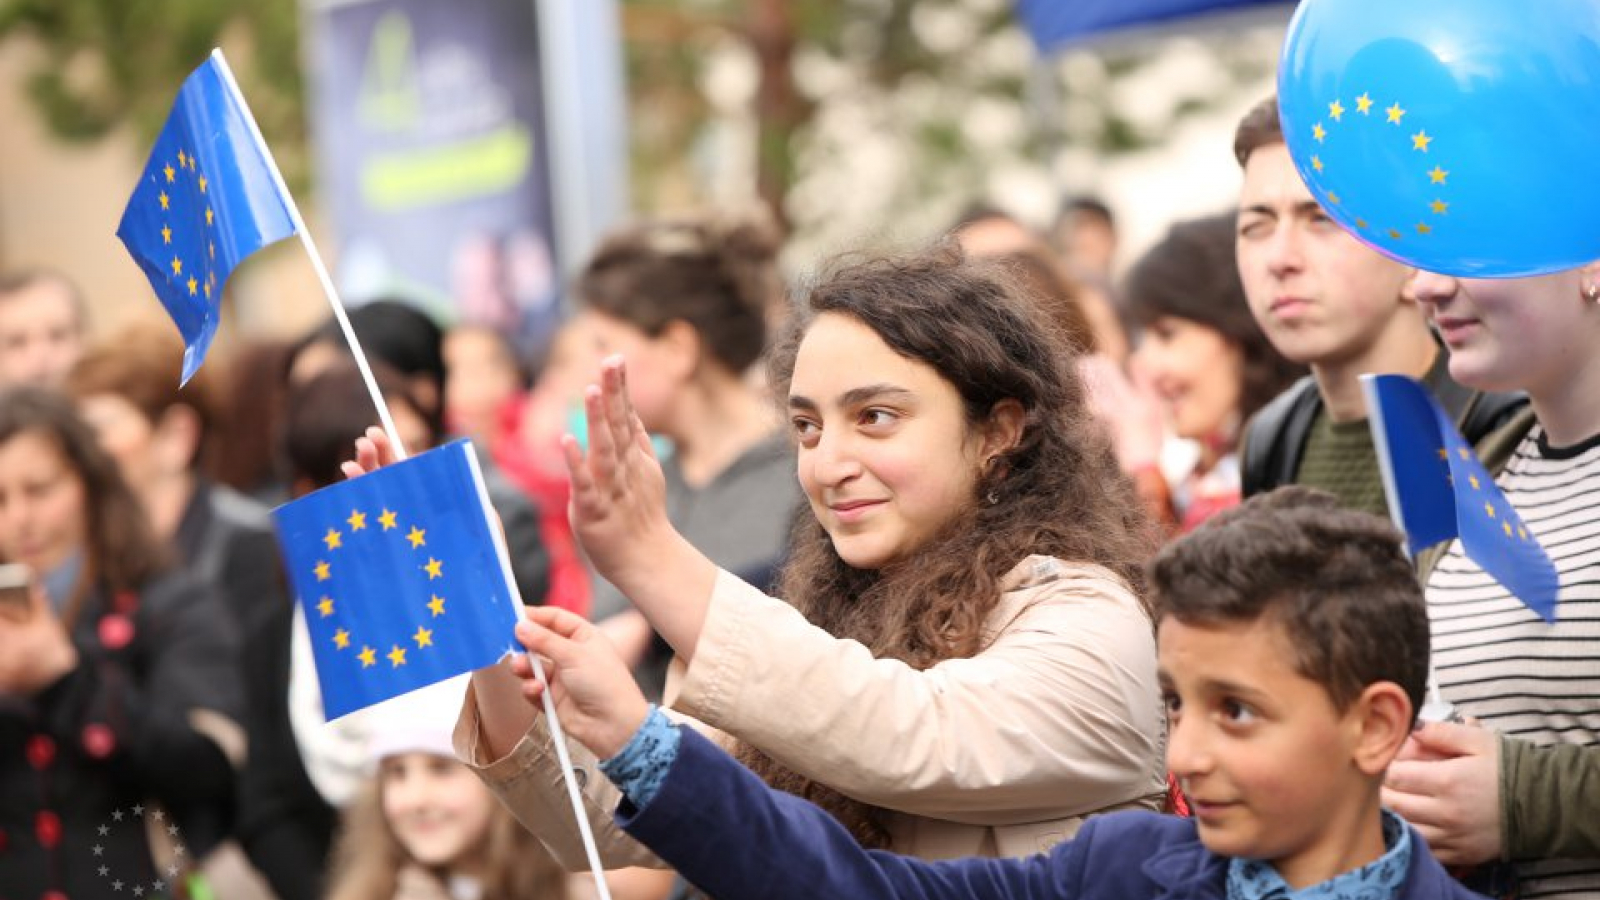 Armenia to celebrate Europe Day 2019 in May